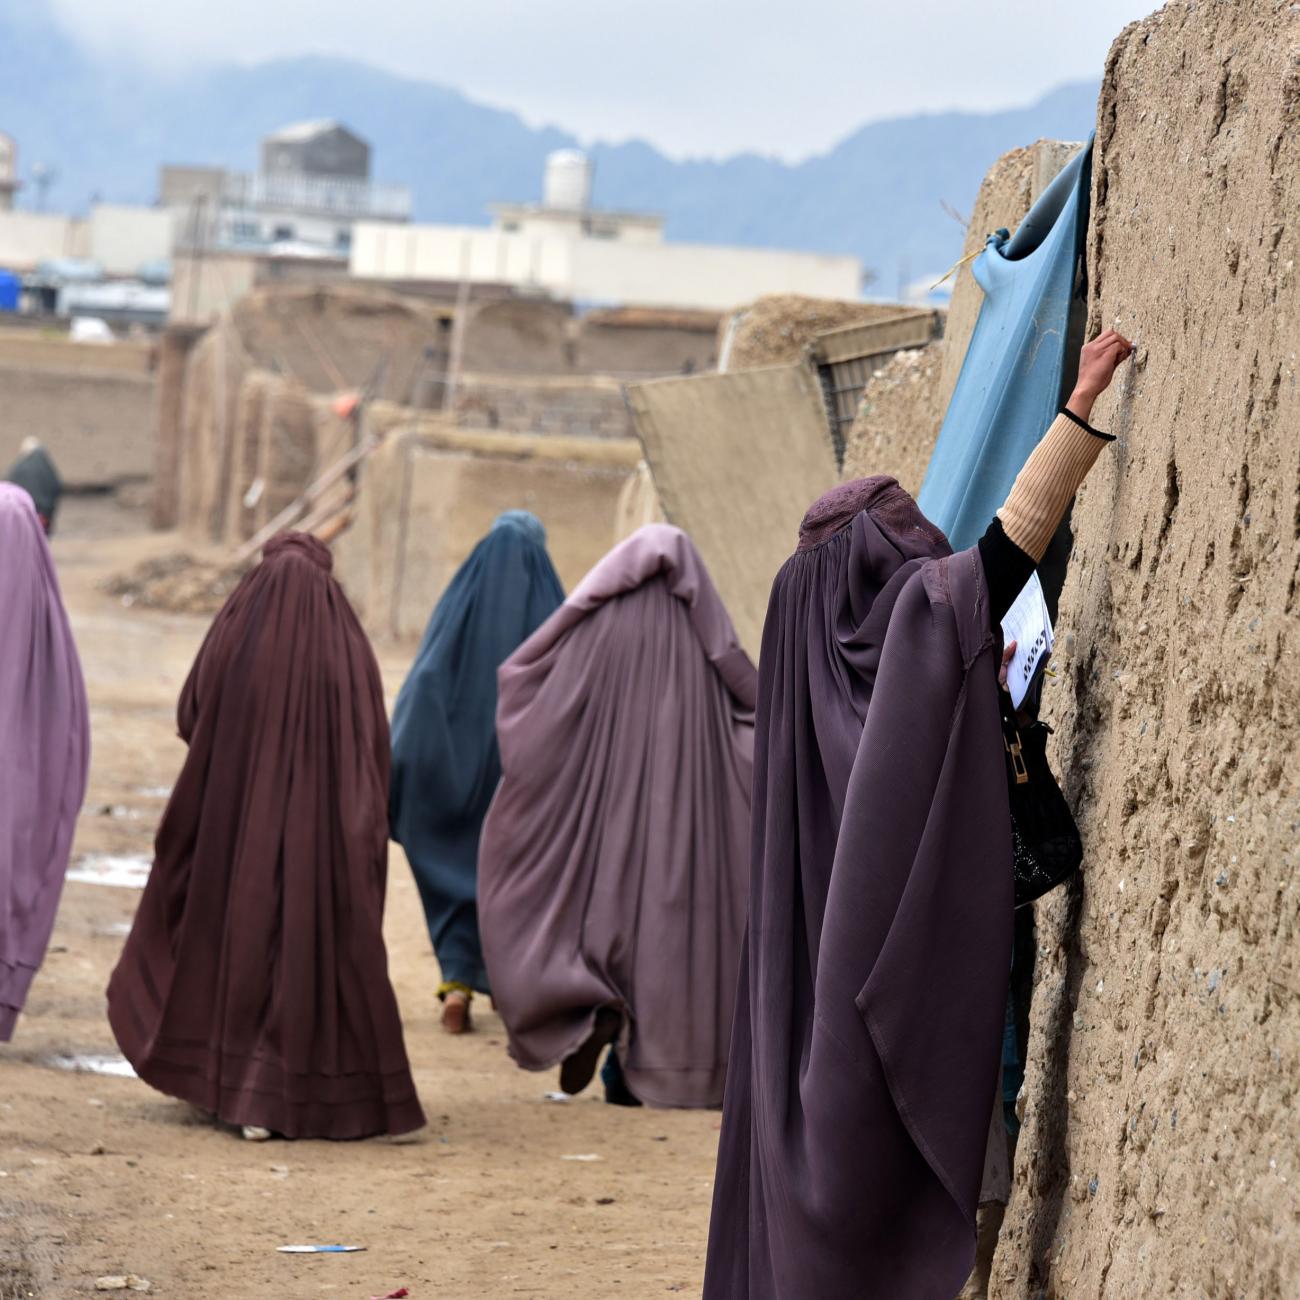 Women in lavender, blue, and burgundy burkas who are part of an immunization team write a message on the wall of a stone house during a vaccination campaign in Kandahar, Afghanistan on January 28, 2020. 